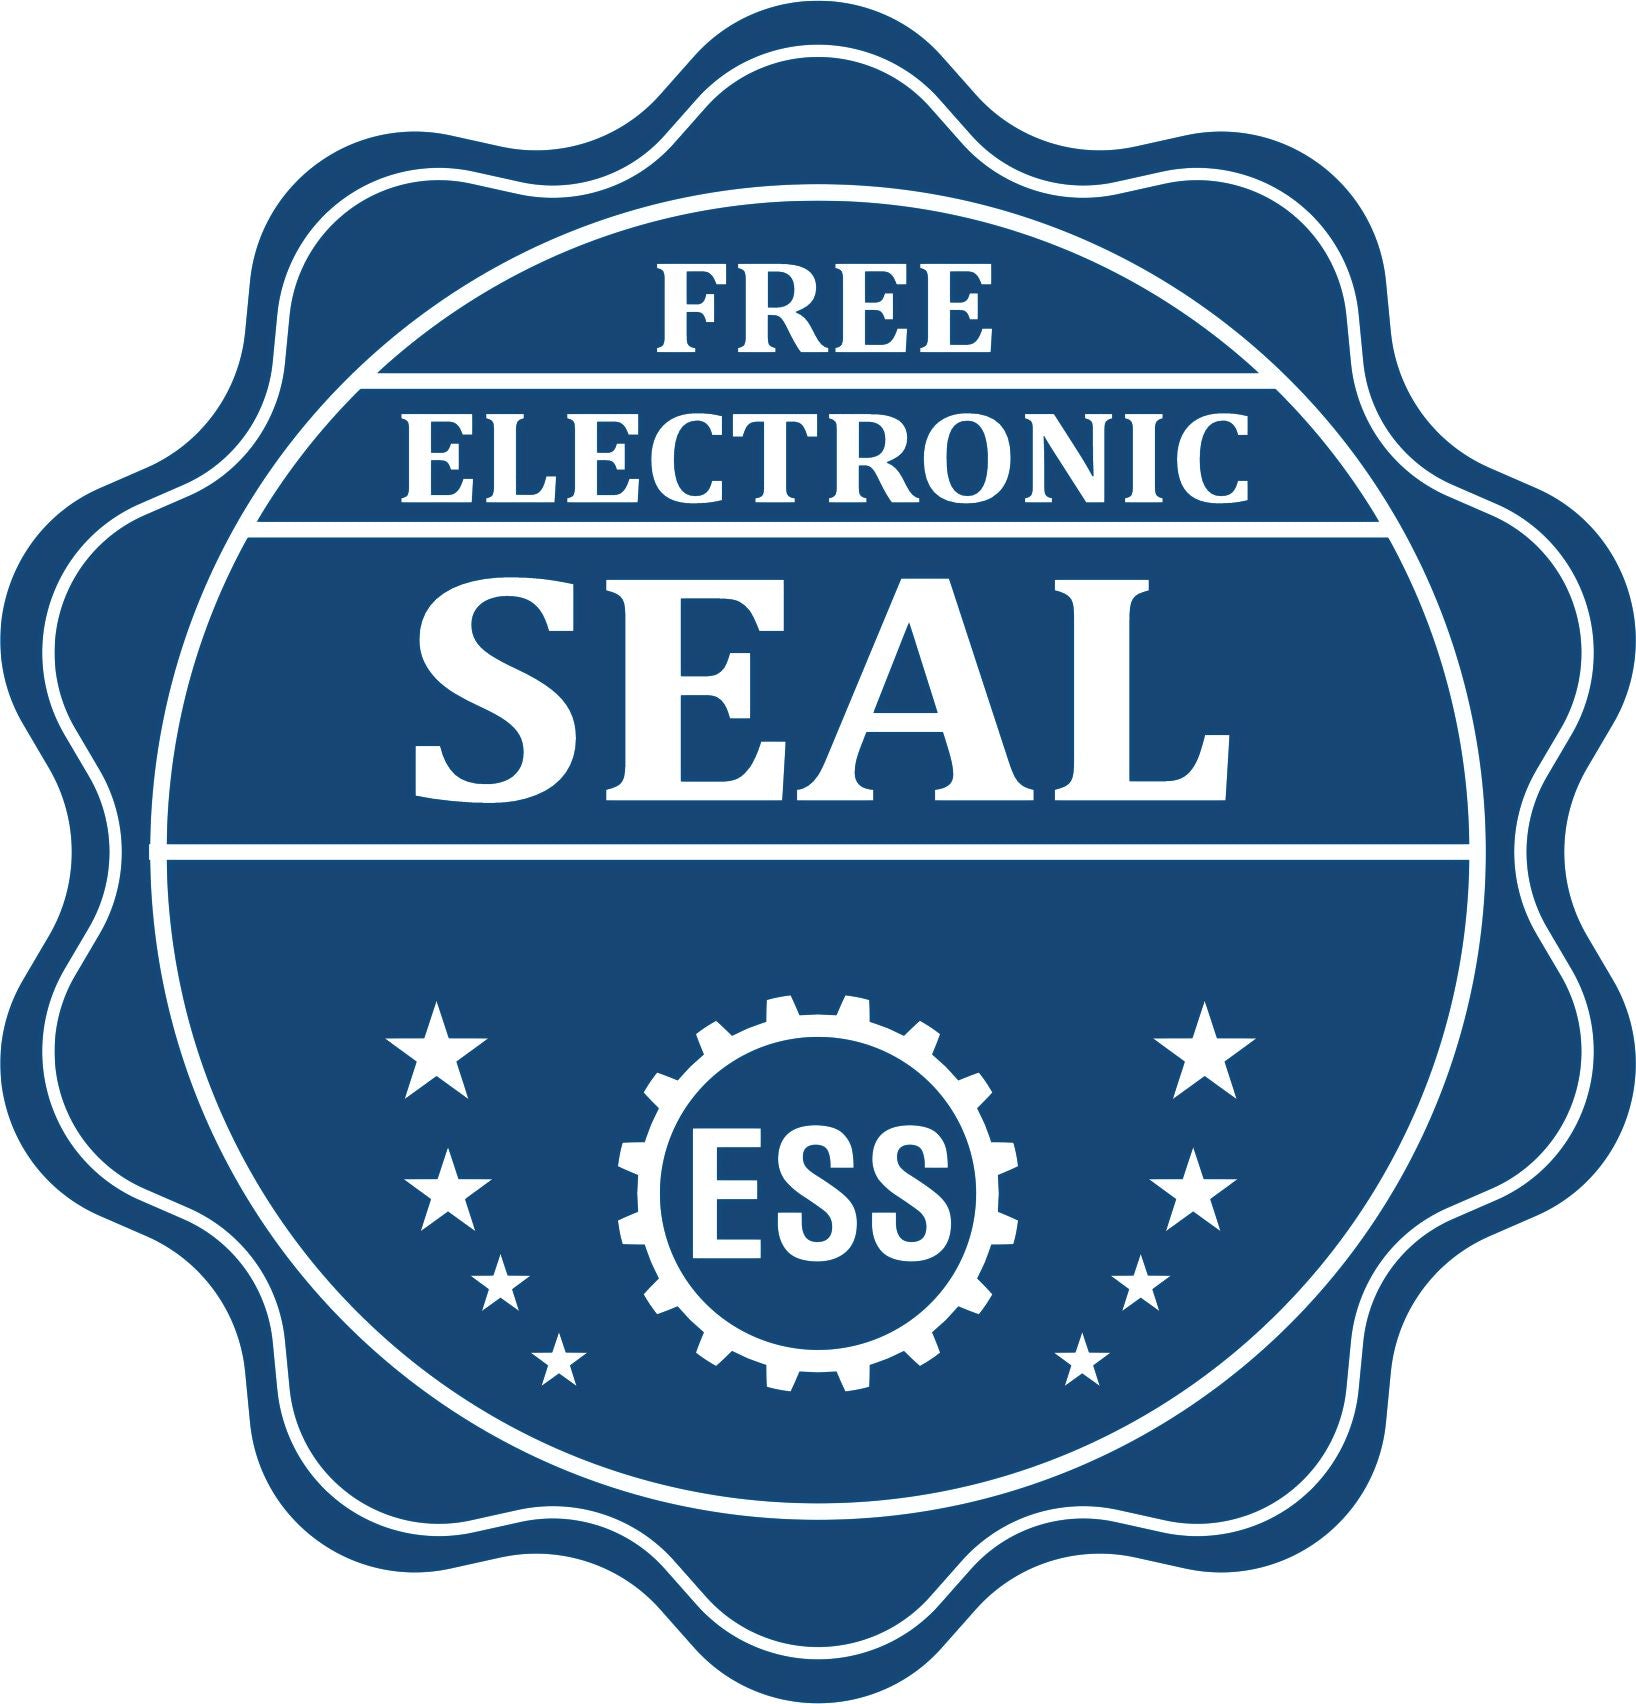 A badge showing a free electronic seal for the Hybrid Utah Engineer Seal with stars and the ESS gear on the emblem.